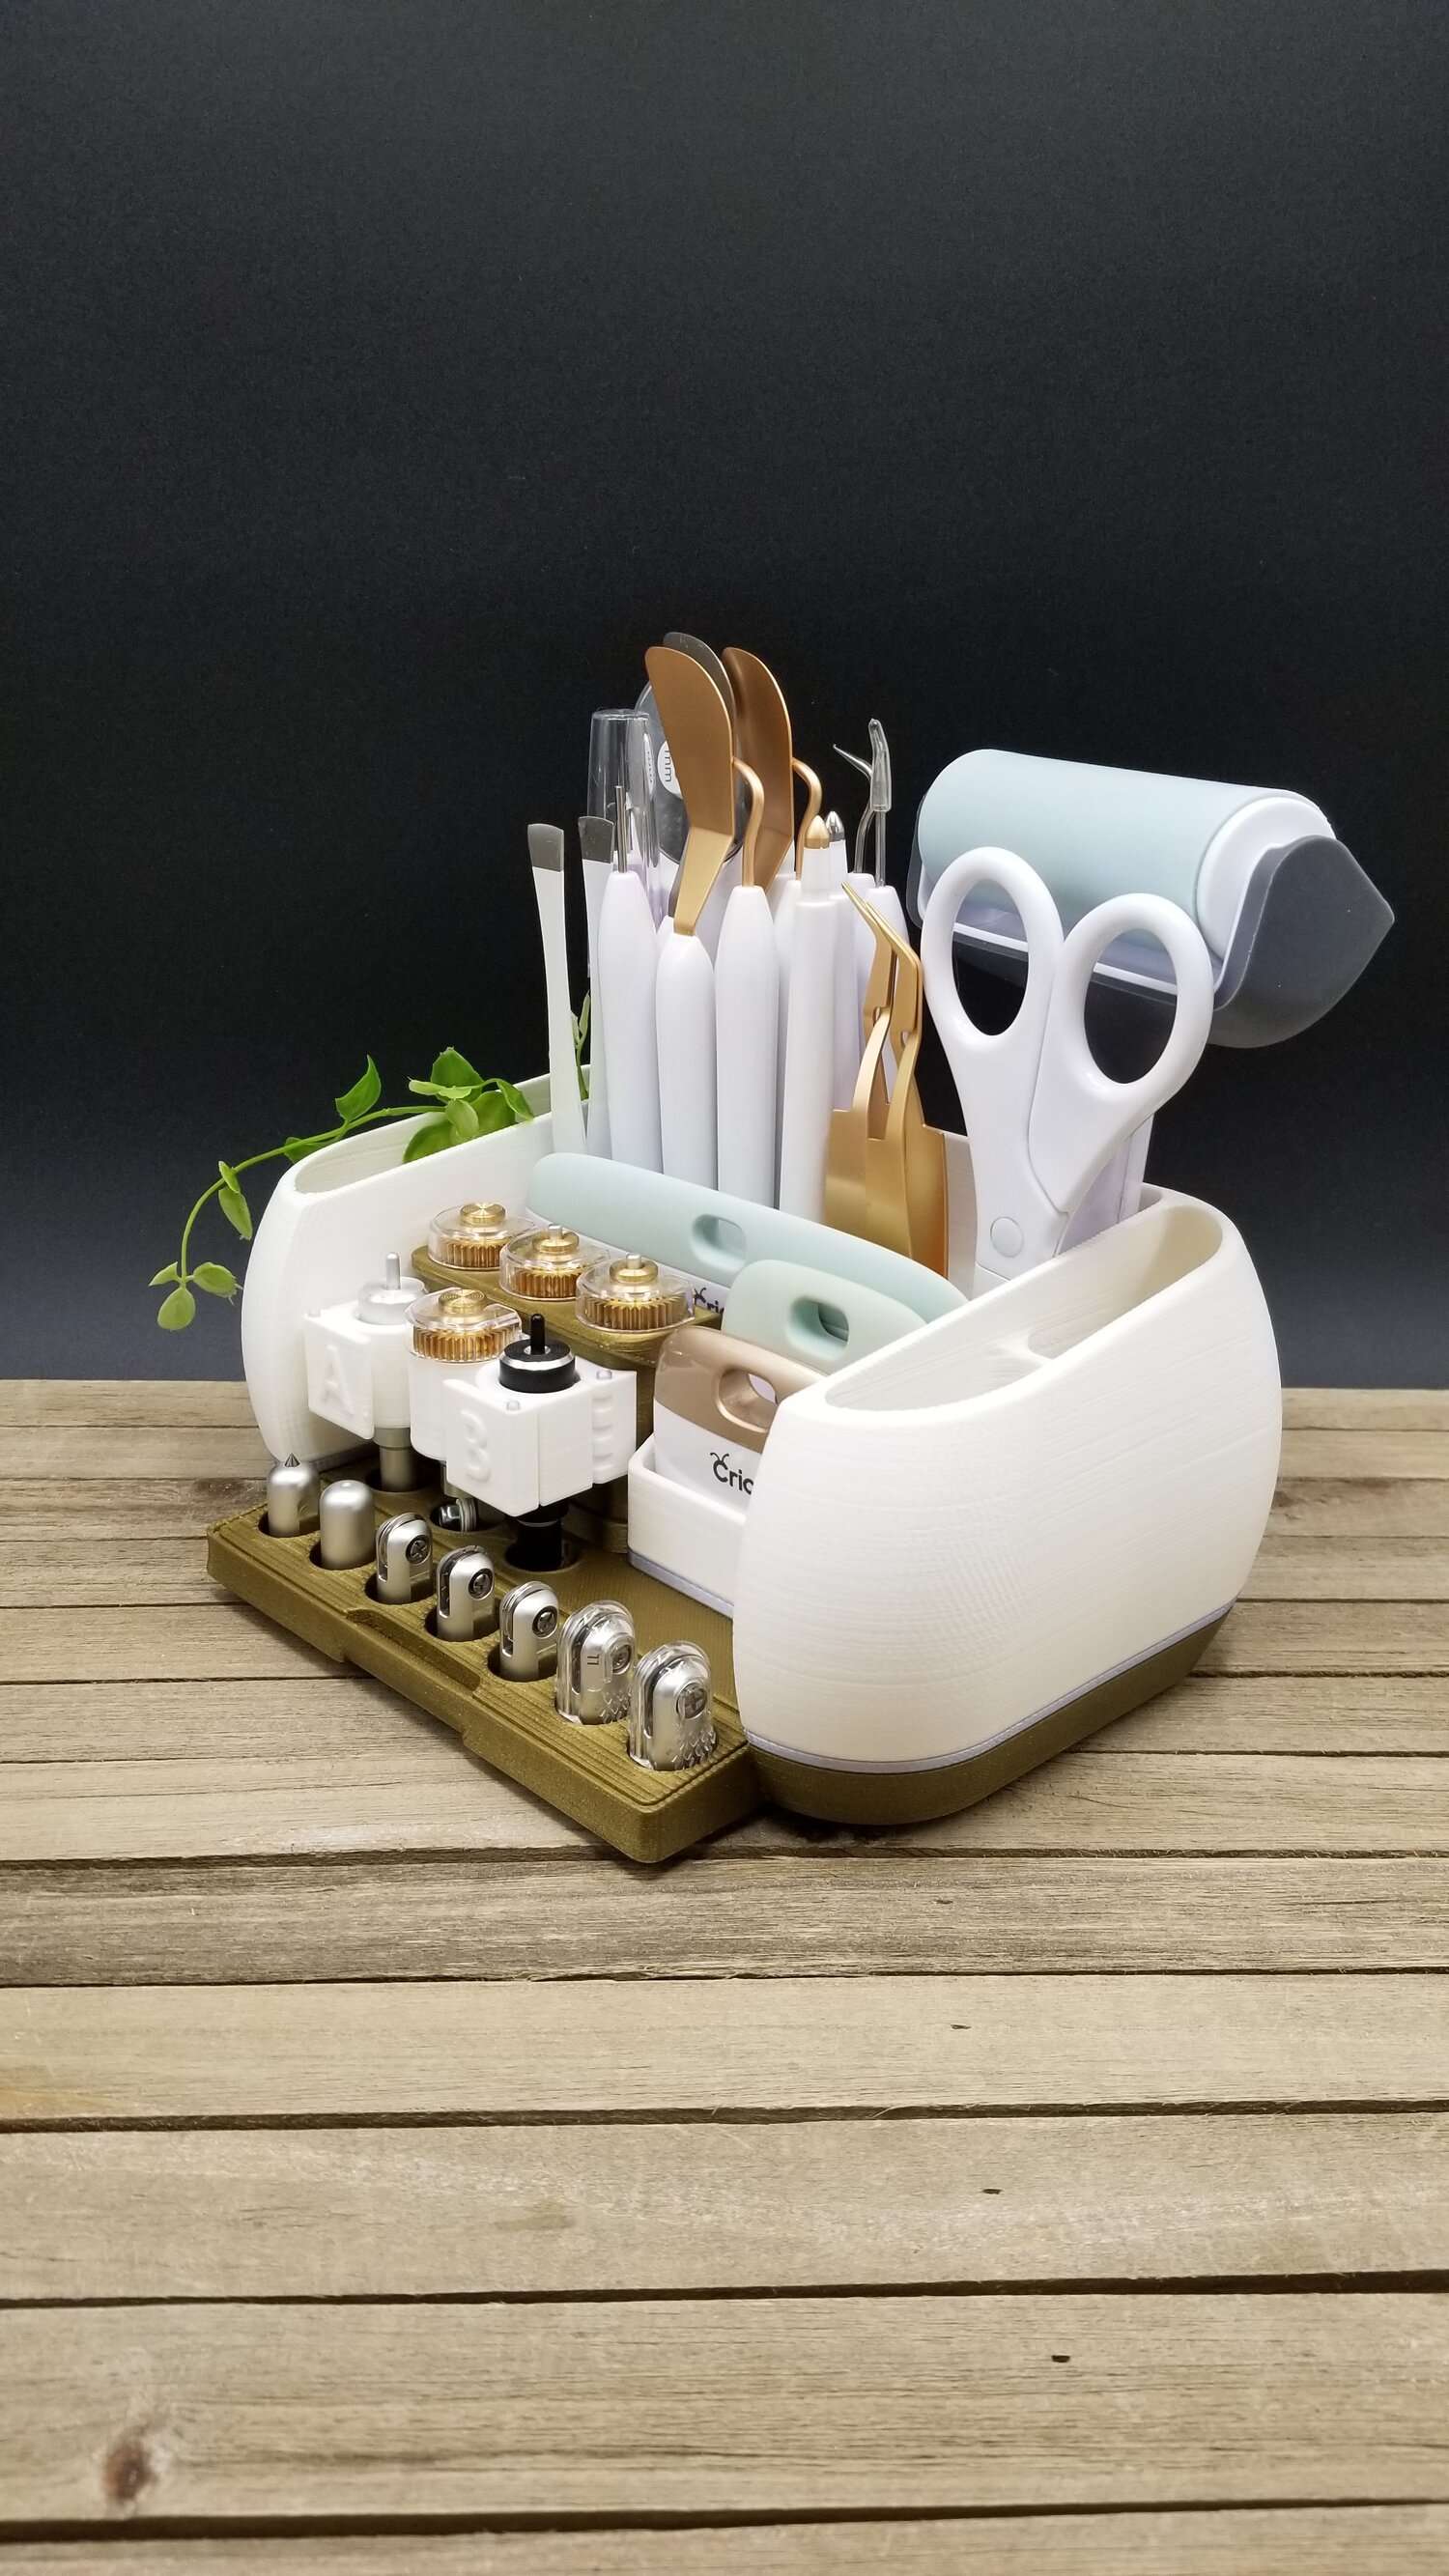 Tool Holder and Organizer for Cricut Tools and Blades